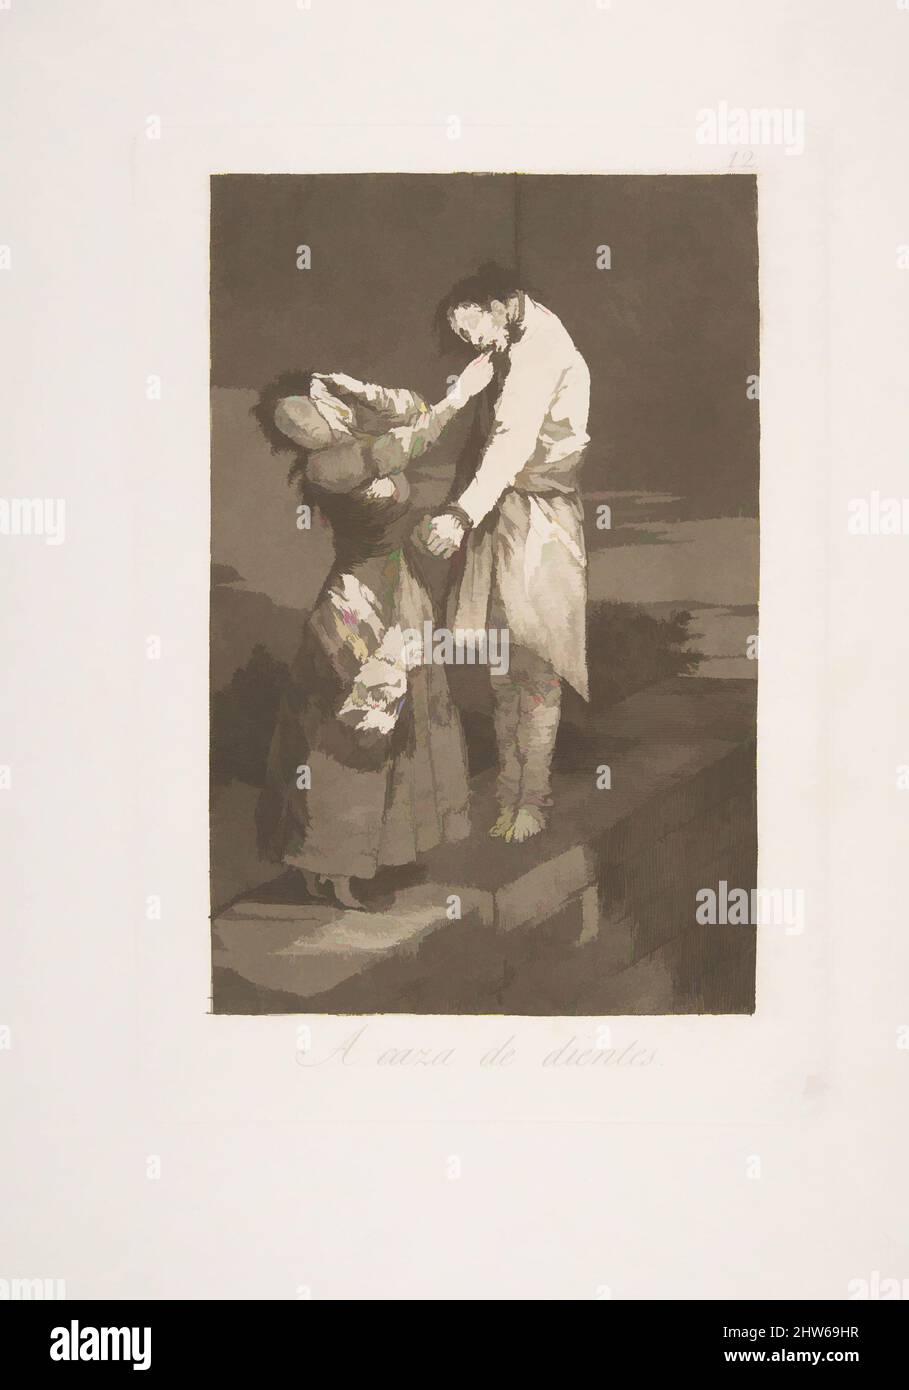 Art inspired by Plate 12 from 'Los Caprichos': Out hunting for teeth (A caza de dientes.), 1799, Etching, burnished aquatint and burin, Plate: 8 1/2 × 5 7/8 in. (21.6 × 15 cm), Prints, Goya (Francisco de Goya y Lucientes) (Spanish, Fuendetodos 1746–1828 Bordeaux), This is plate number, Classic works modernized by Artotop with a splash of modernity. Shapes, color and value, eye-catching visual impact on art. Emotions through freedom of artworks in a contemporary way. A timeless message pursuing a wildly creative new direction. Artists turning to the digital medium and creating the Artotop NFT Stock Photo